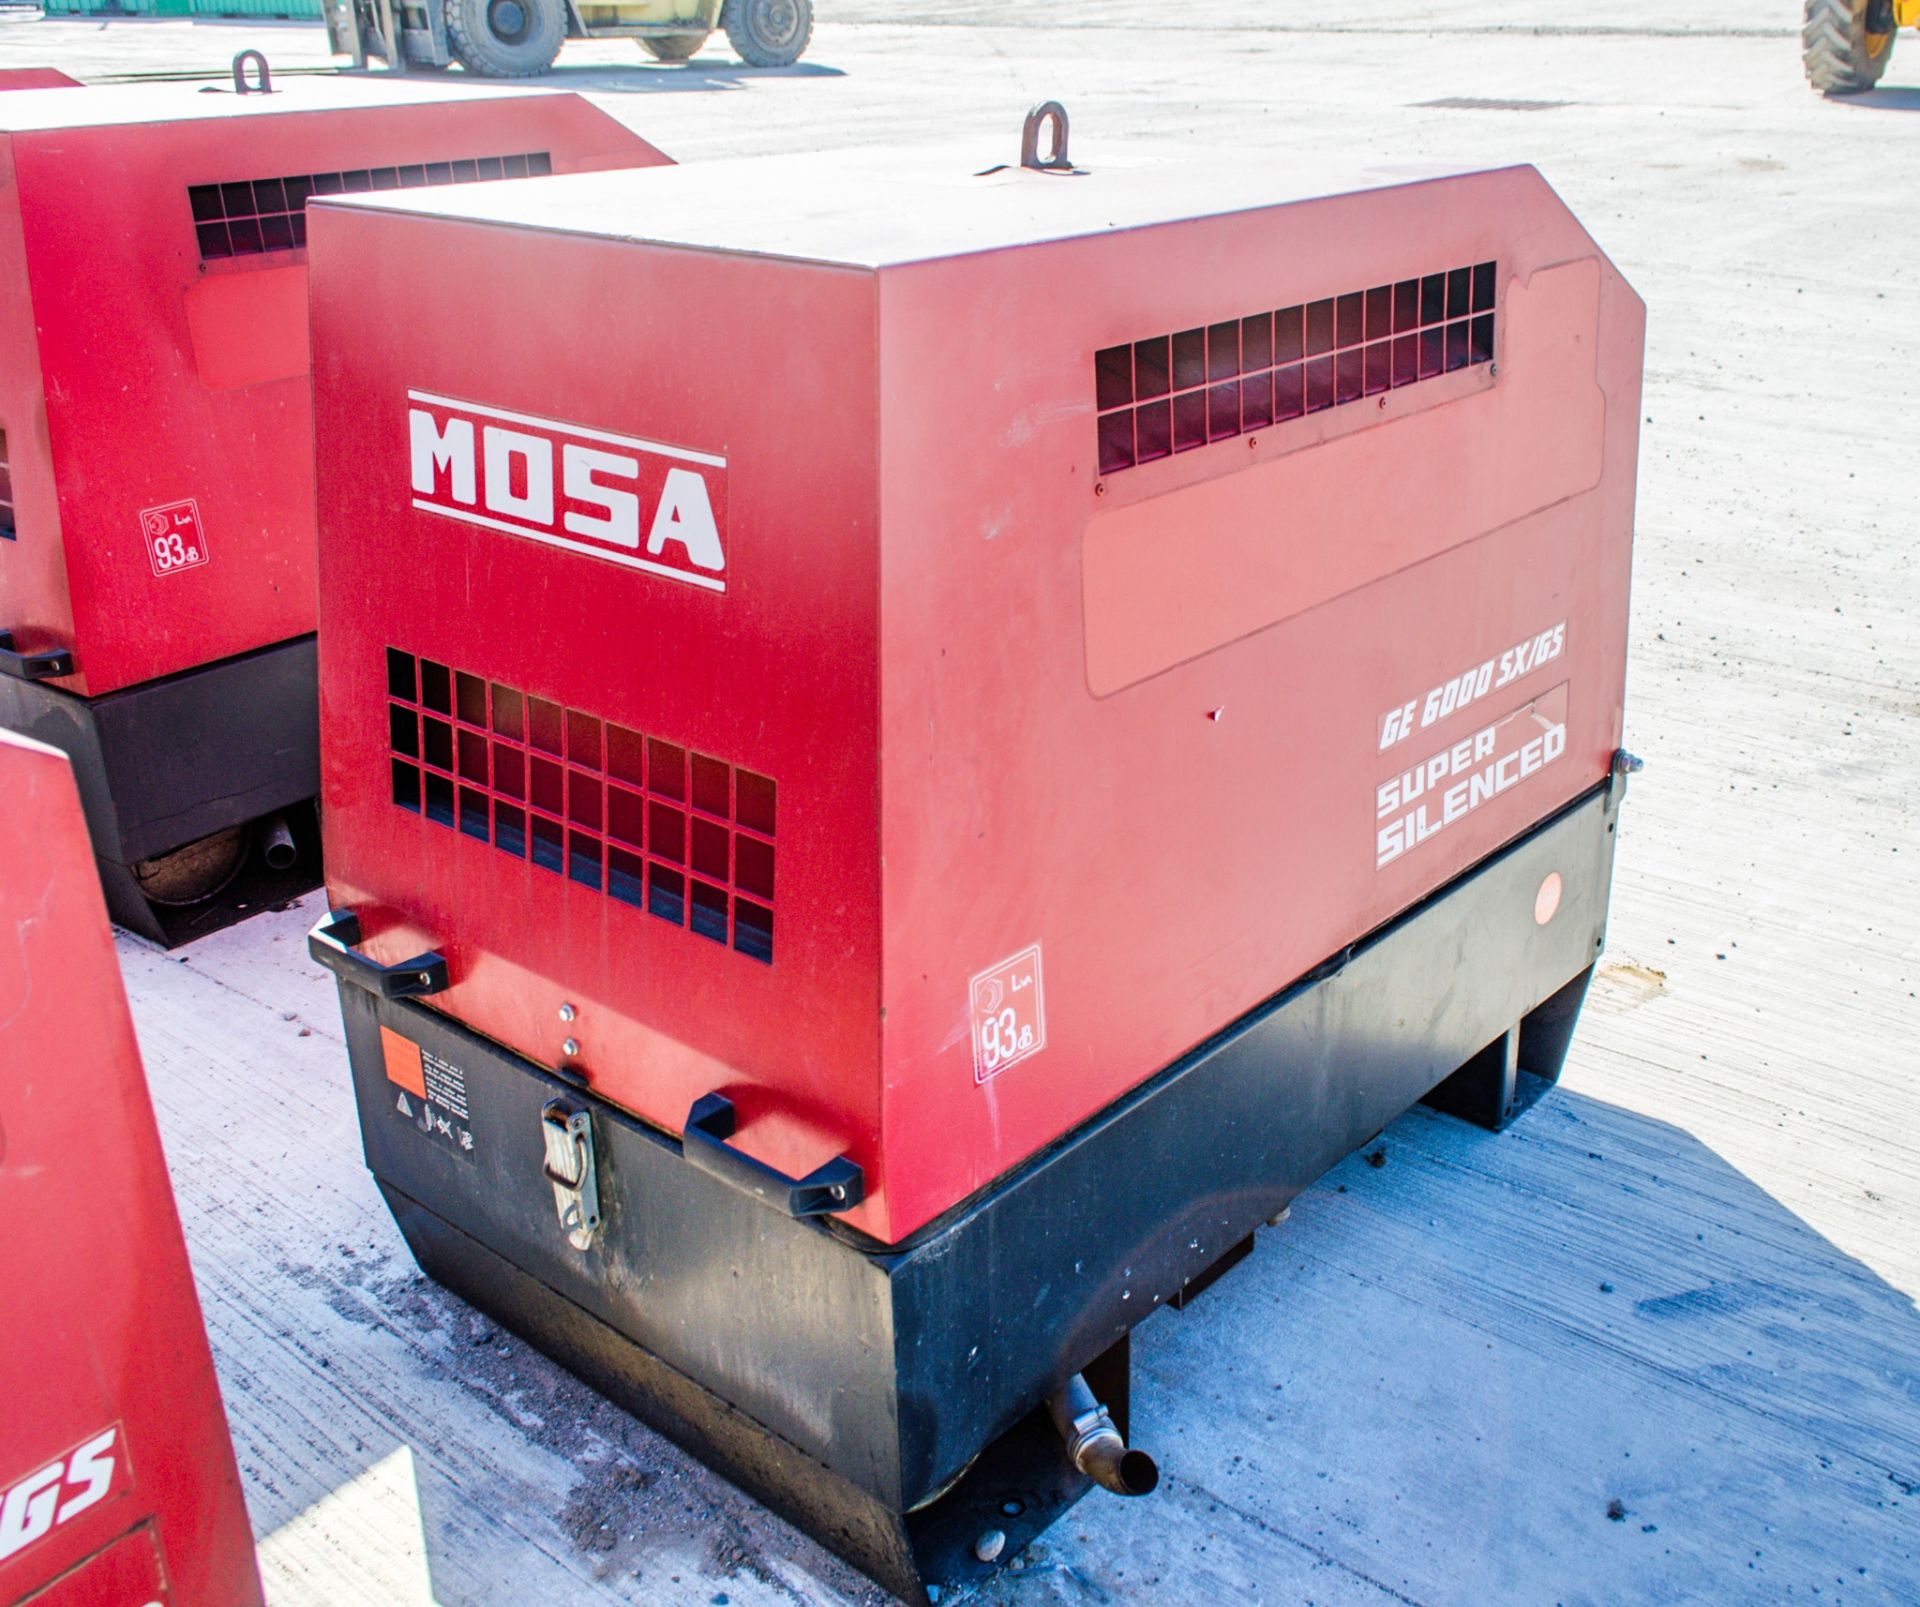 Mosa GE6000 SX/GS diesel driven generator Year: 2014 S/N: 037535 Recorded Hours: 747 1411-4908 - Image 2 of 4